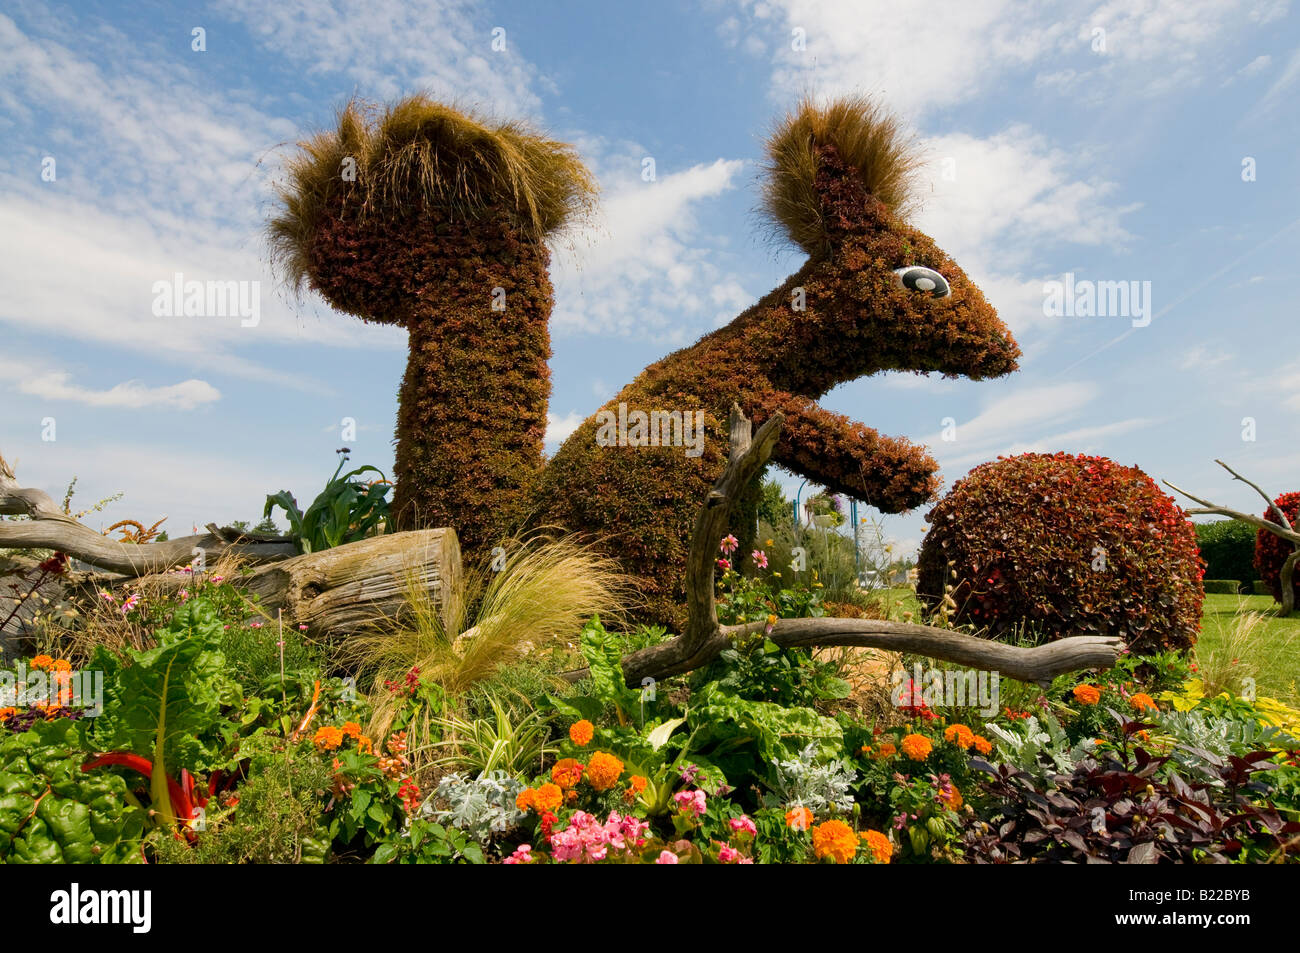 Box hedging topiary effigy of squirrel on roundabout, Descartes, Indre-et-Loire, France. Stock Photo